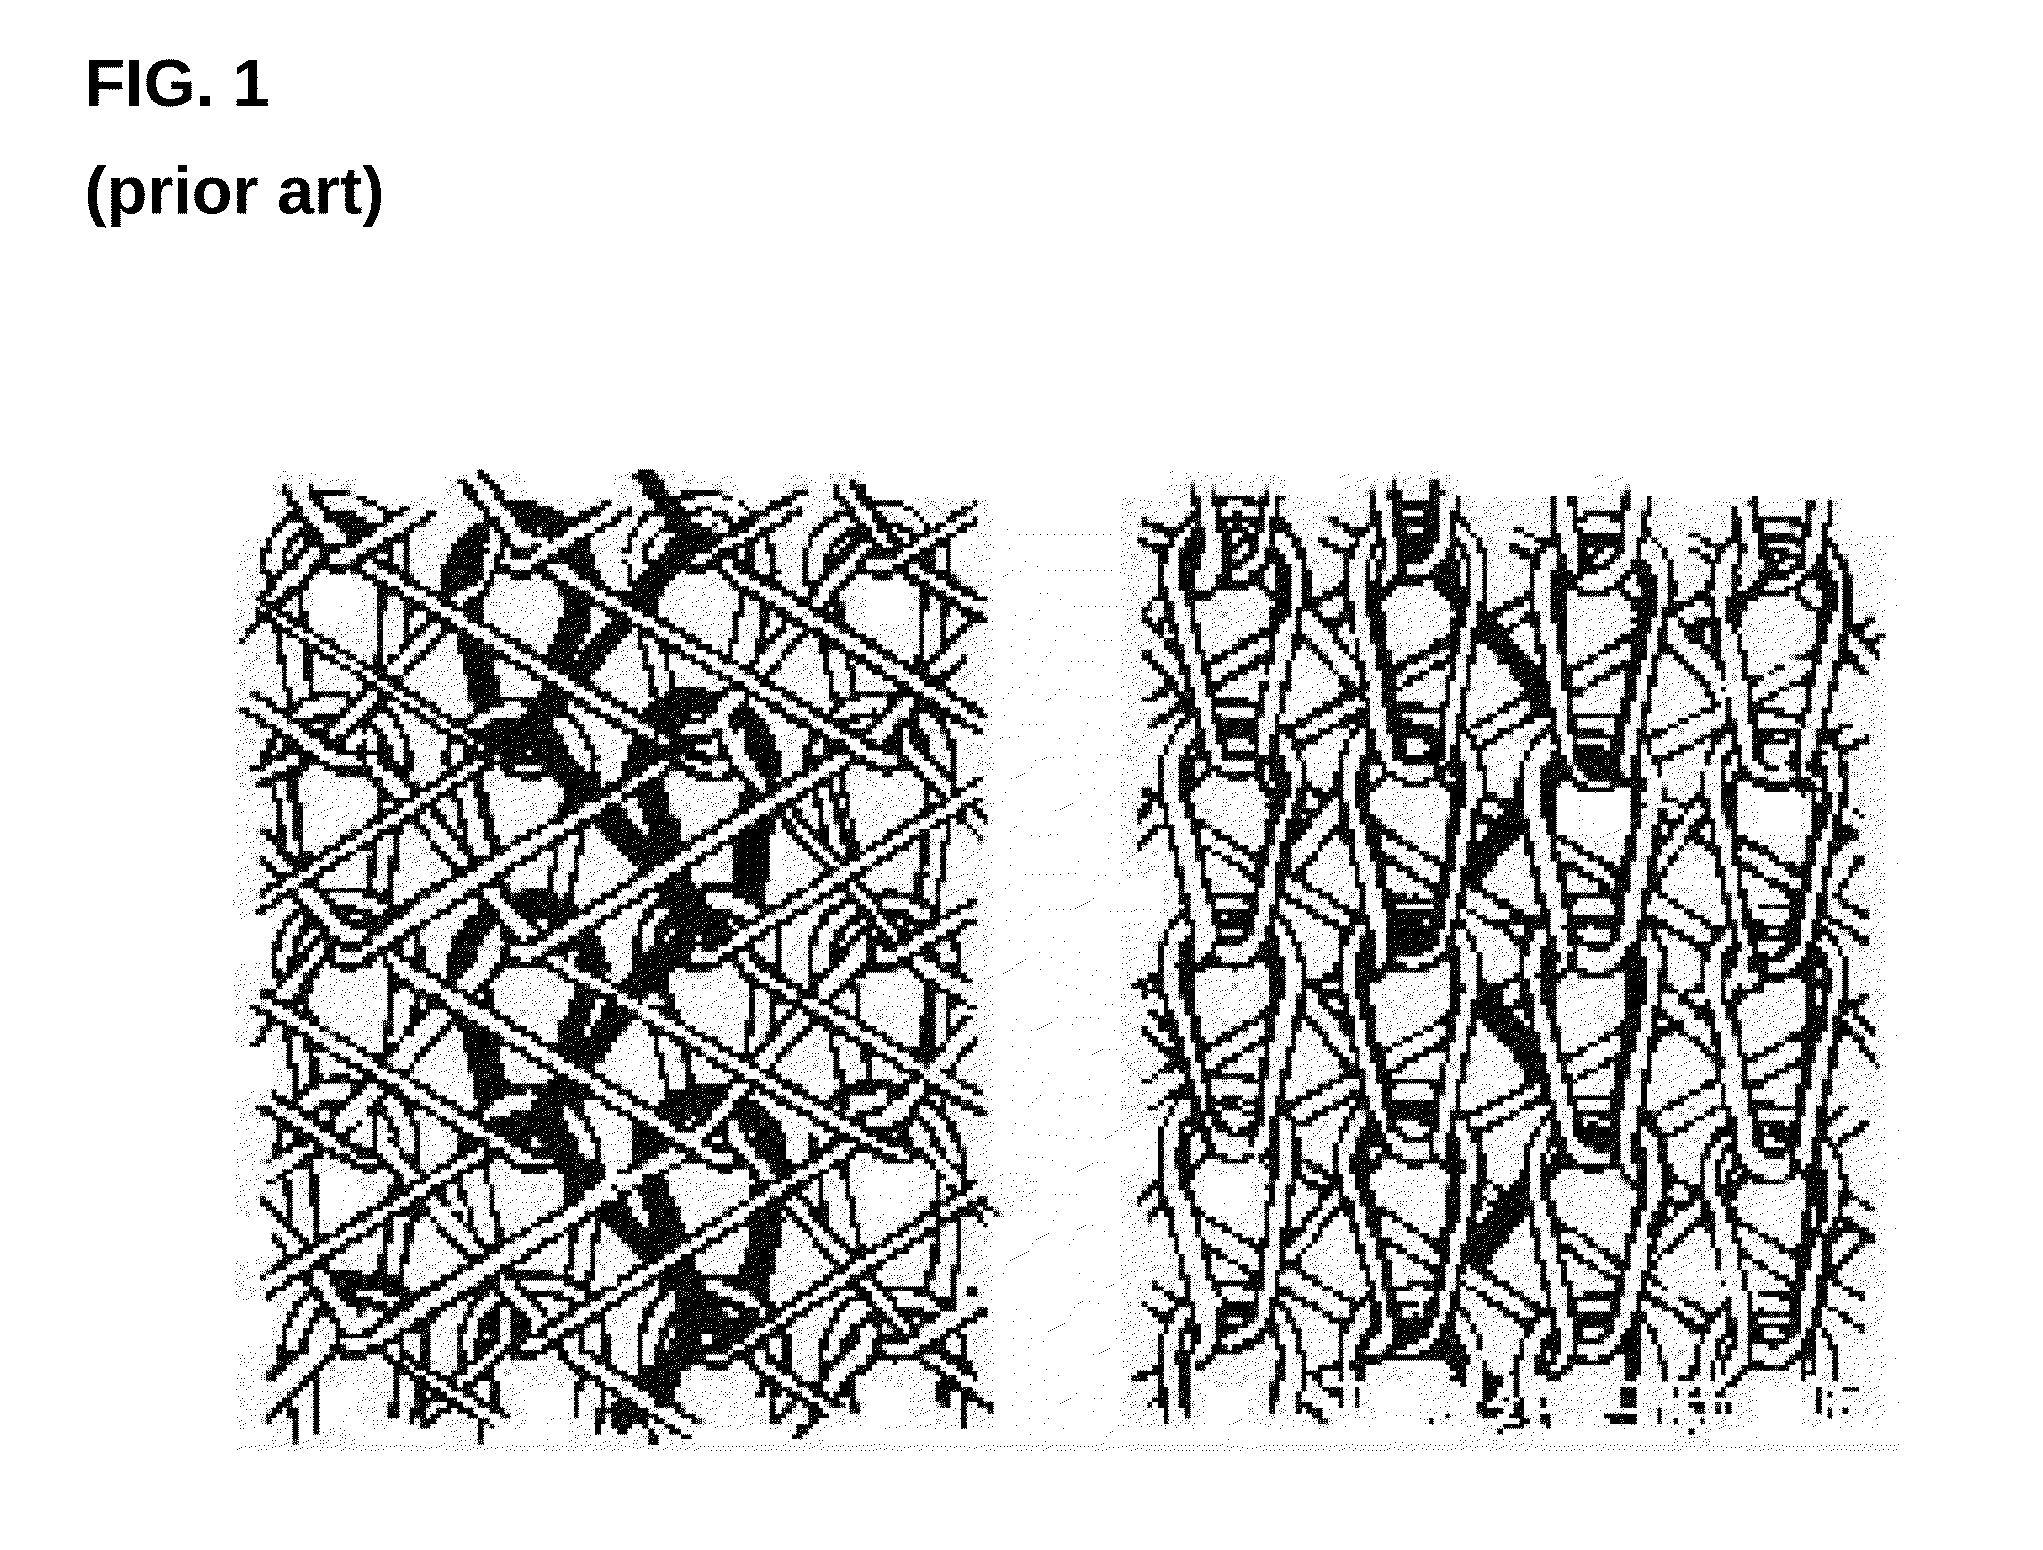 Warp knitting elastic fabric and method of fabricating therefore